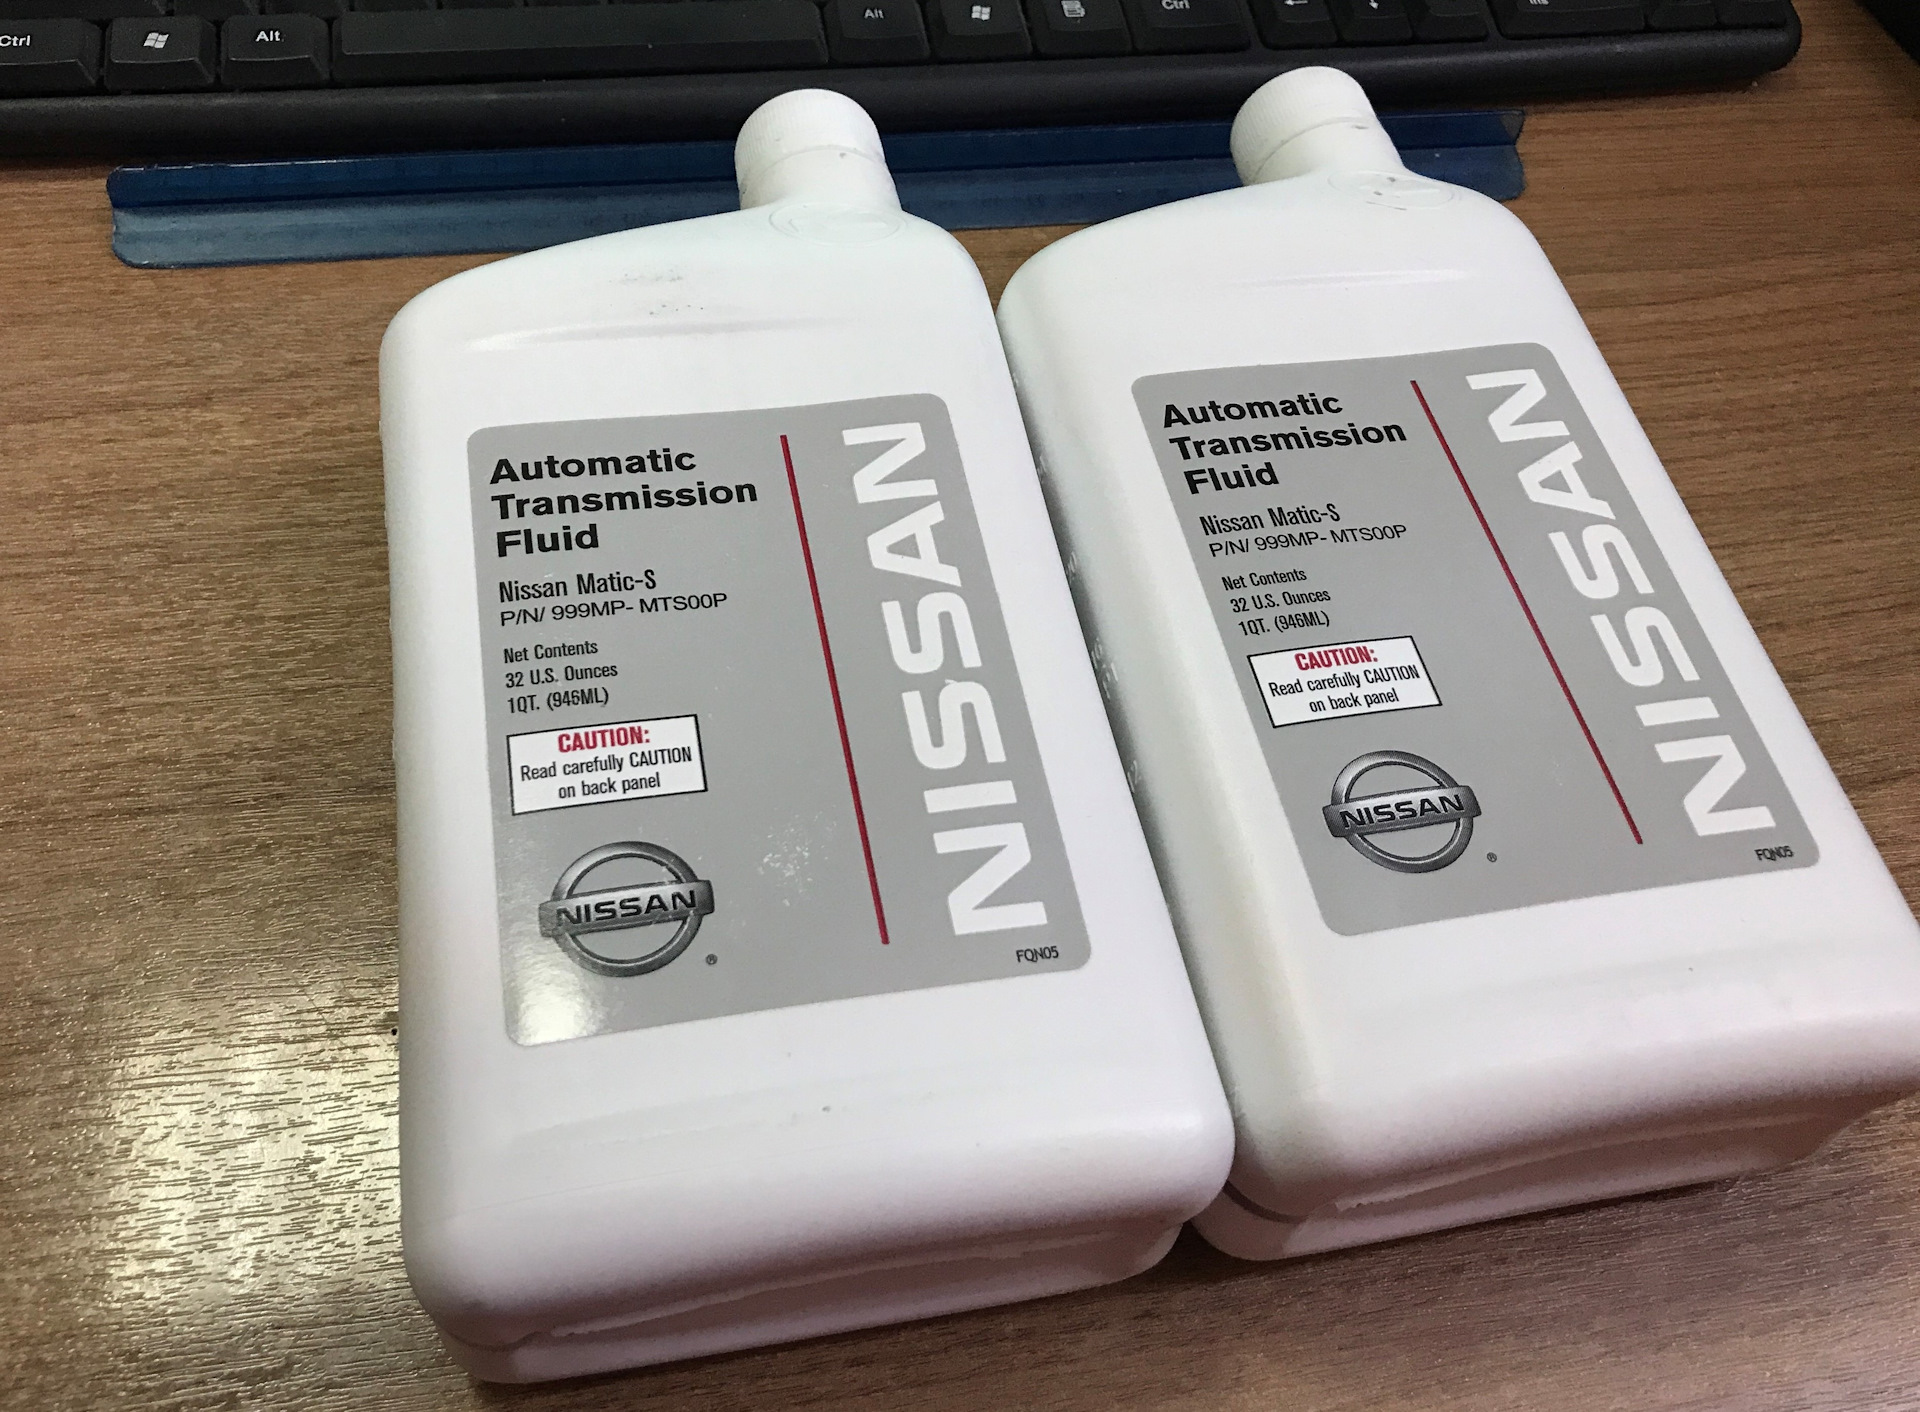 Масло nissan atf. Nissan ATF matic-s 999mp-mts00-p. 999mpmts00p Nissan. Nissan ATF matic s Fluid артикул. Nissan Automatic transmission Fluid matic-s.